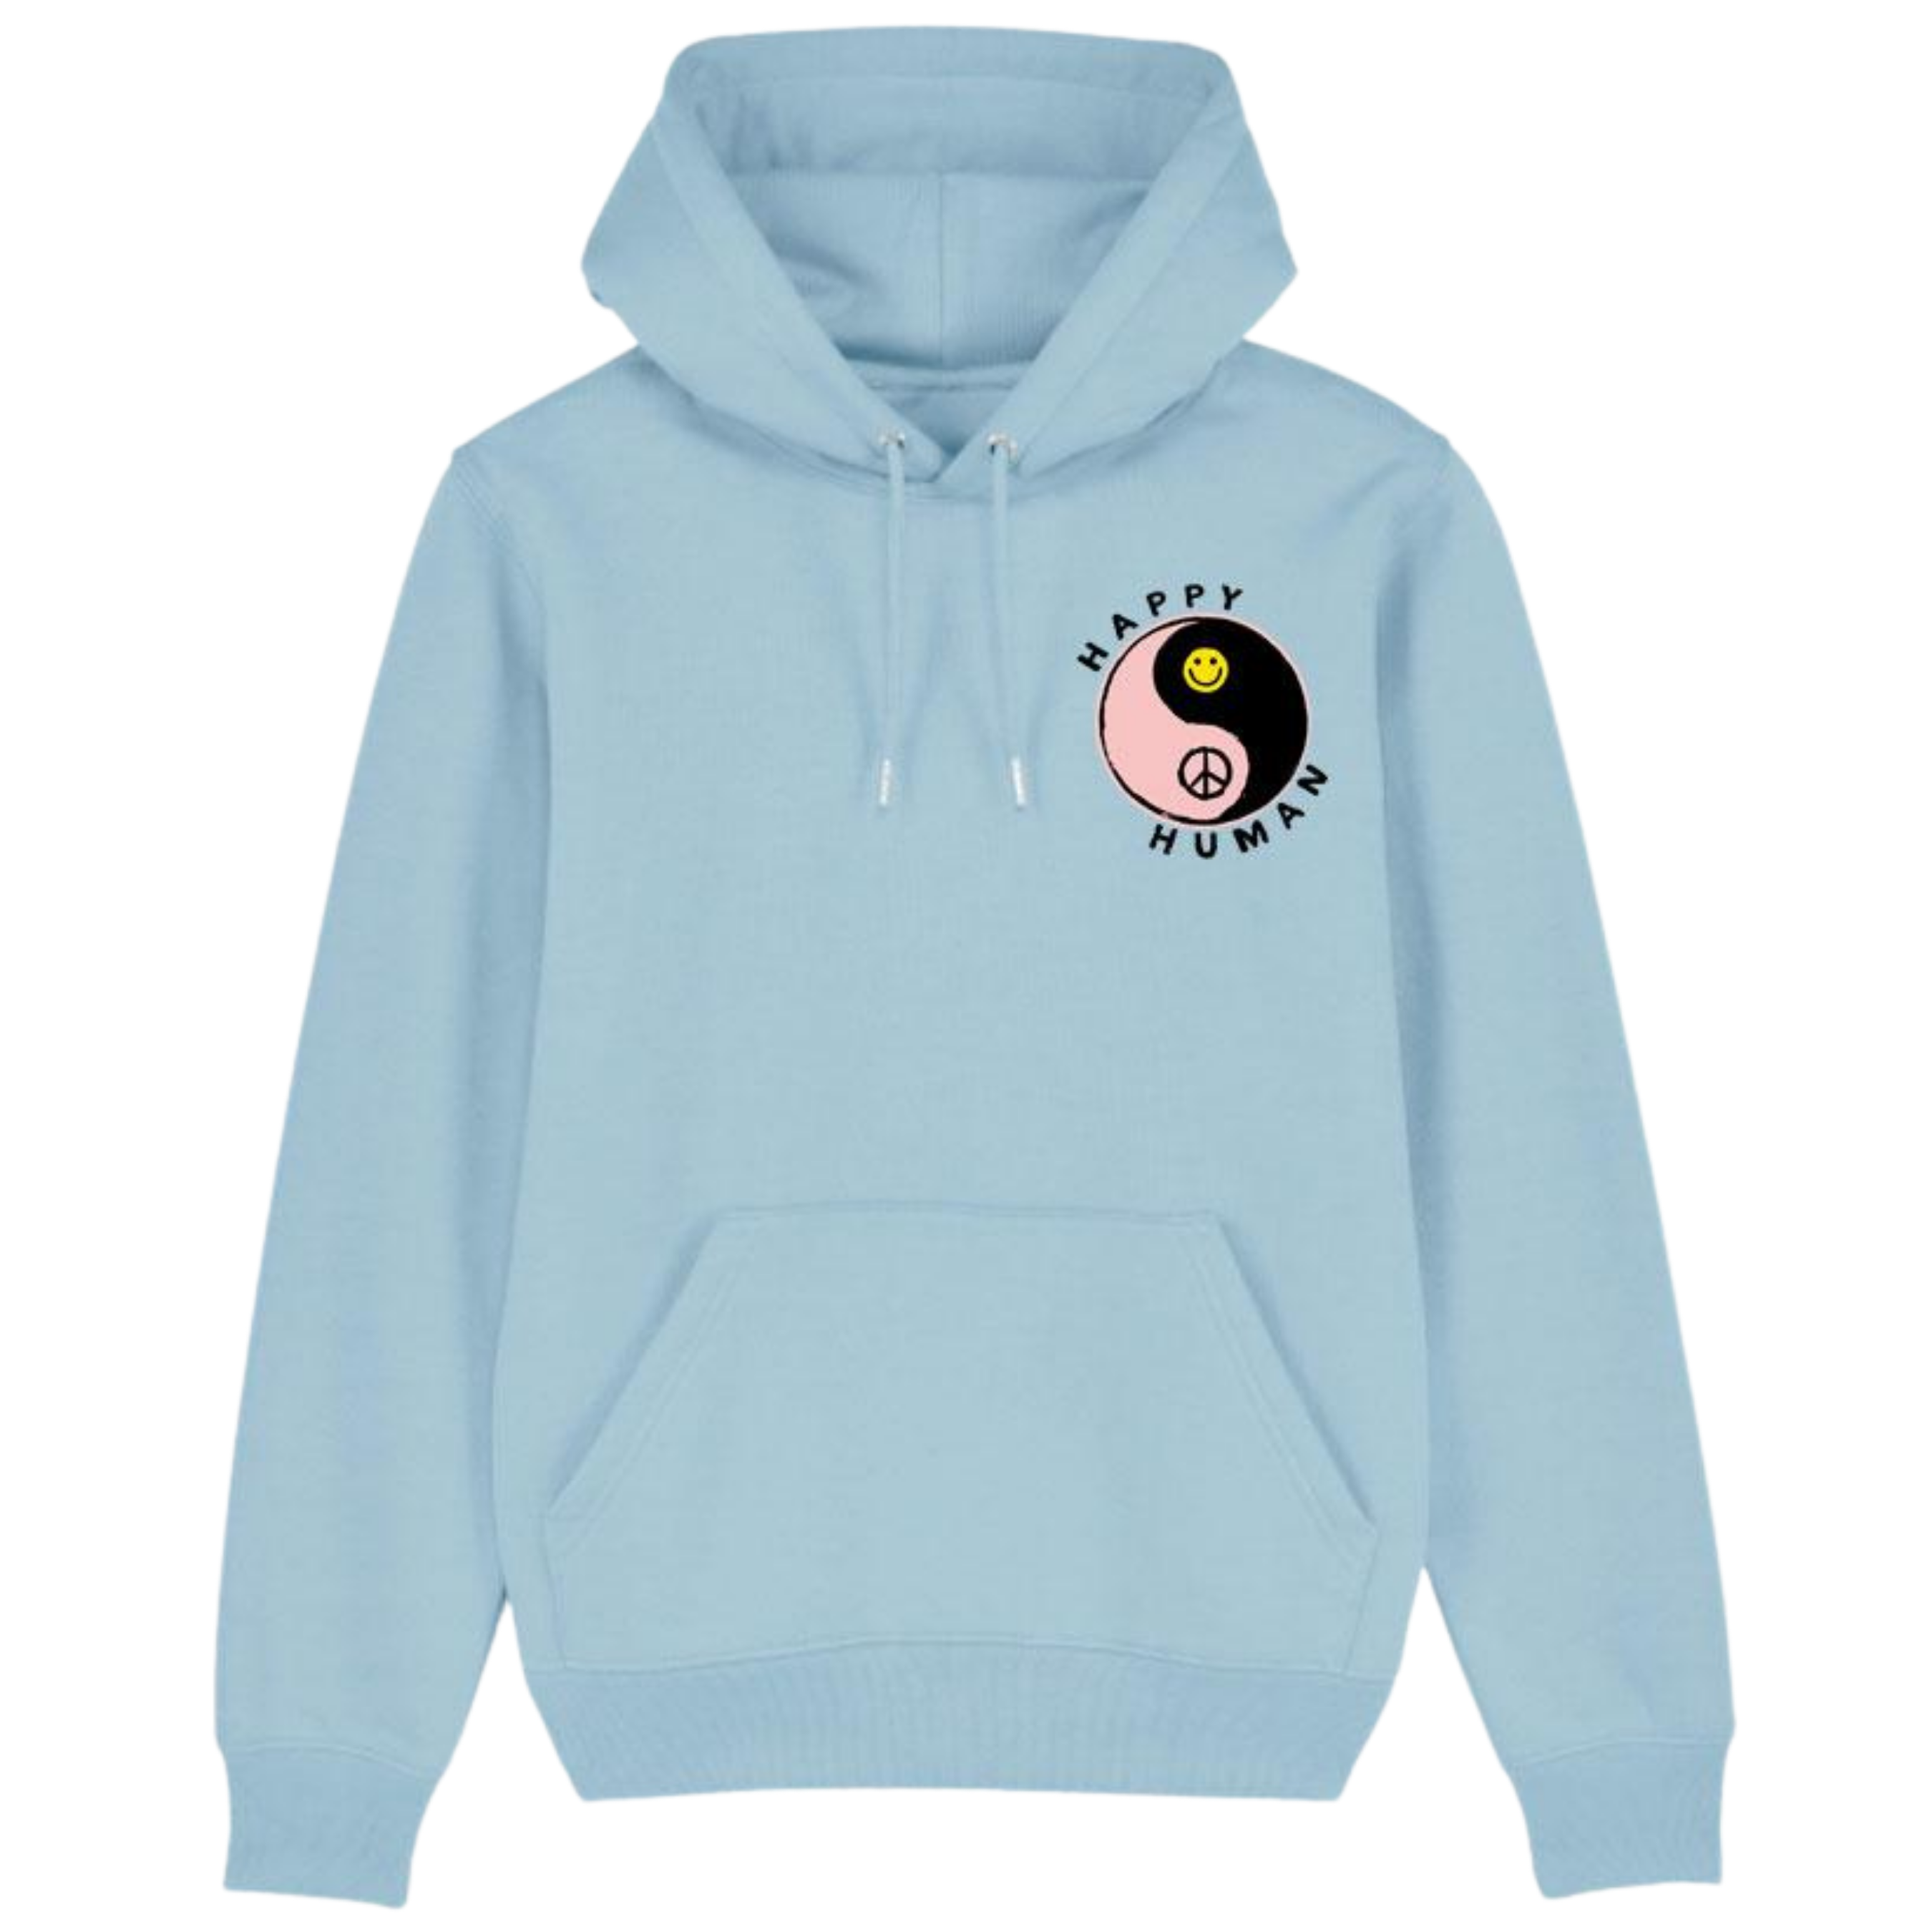 Baby Blue HAPPY HUMAN Hoodie In Aid Of Mind Charity